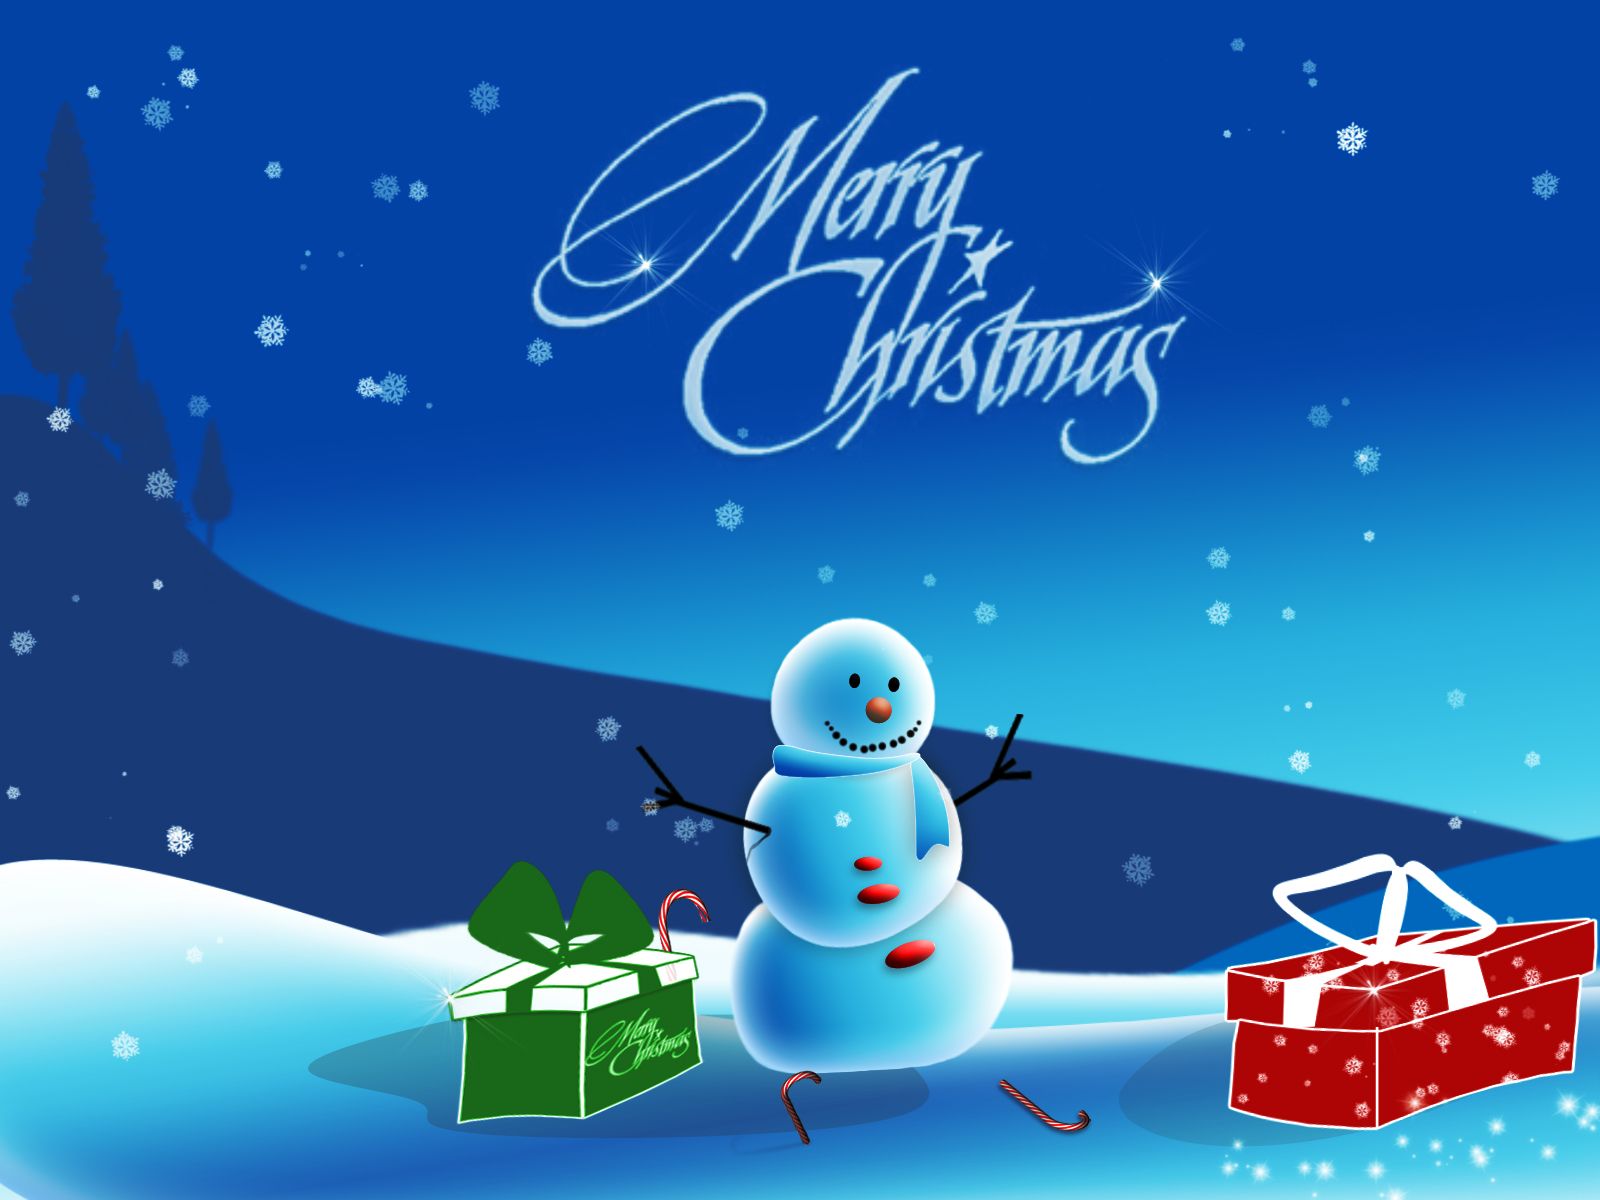 Merry Christmas Wallpapers HD 2015 free download Wallpapers